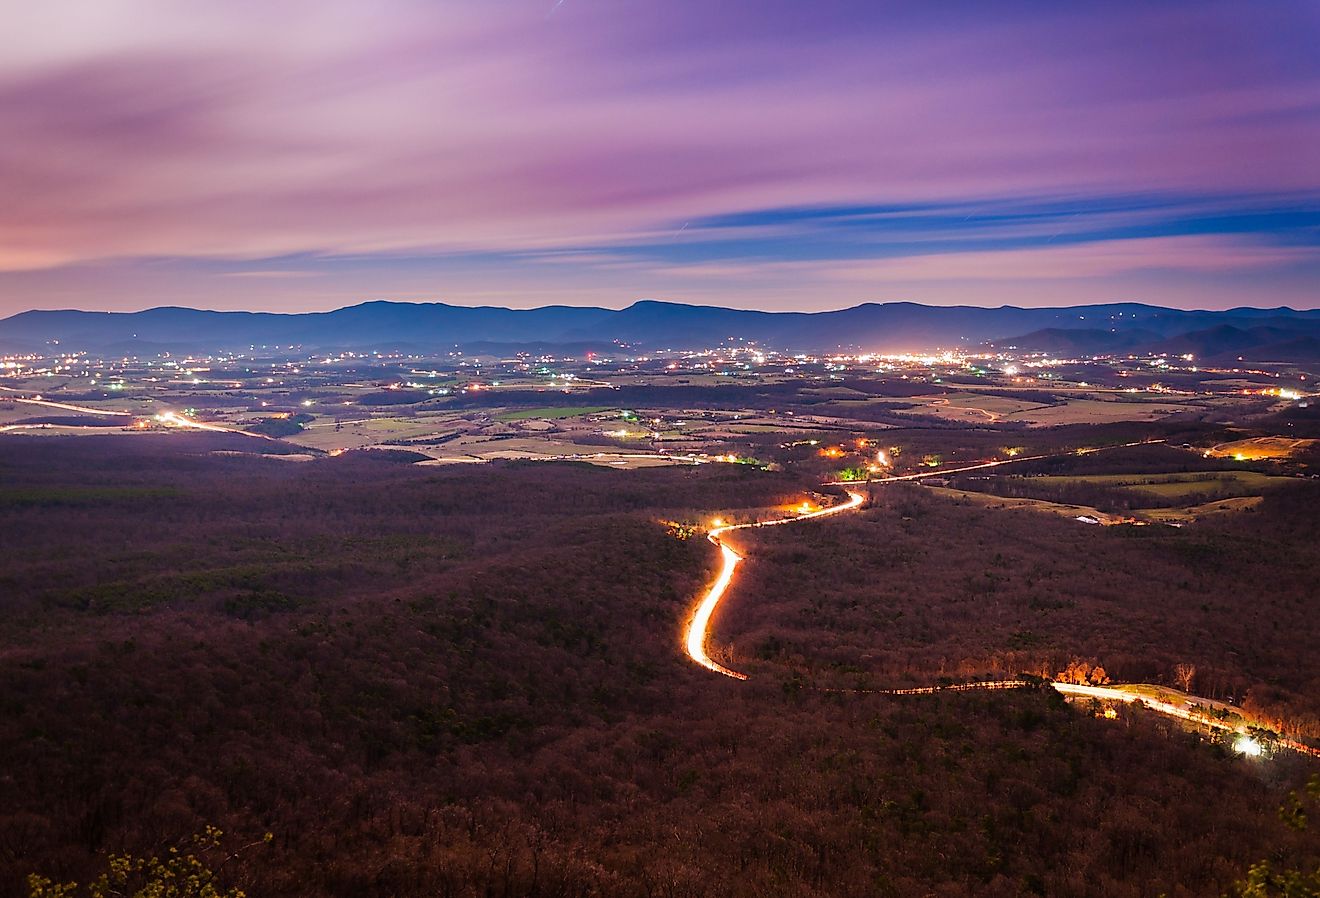 View of the Shenandoah Valley and Luray at night from Massanutten Mountain, in George Washington National Forest, Virginia